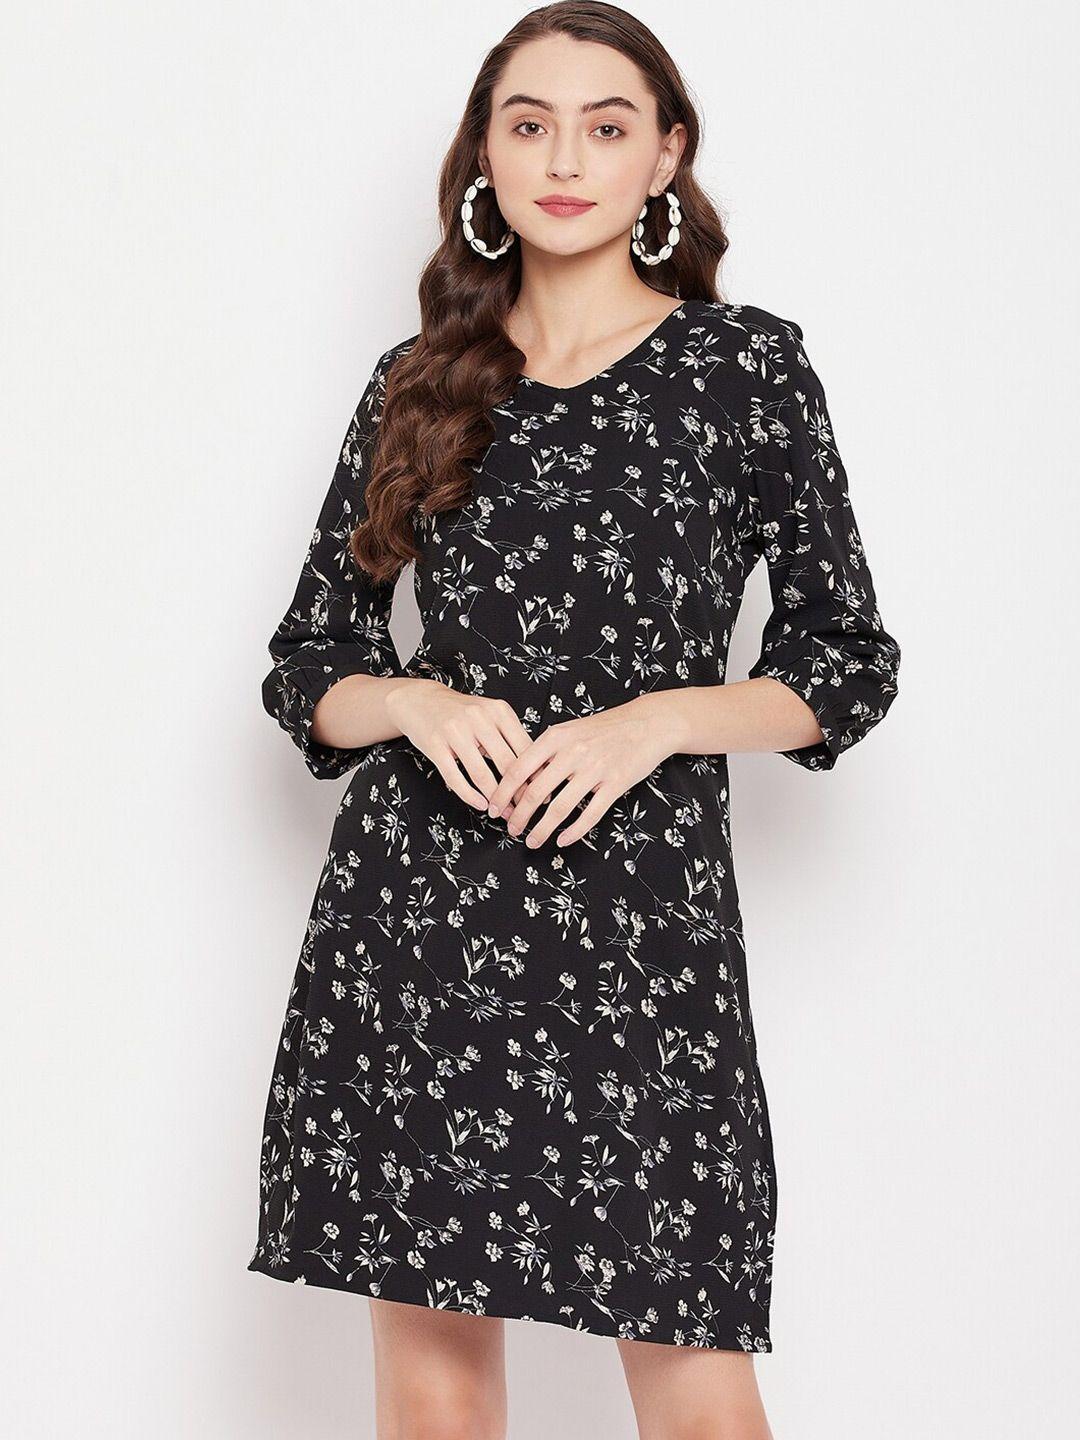 style blush floral printed a line dress